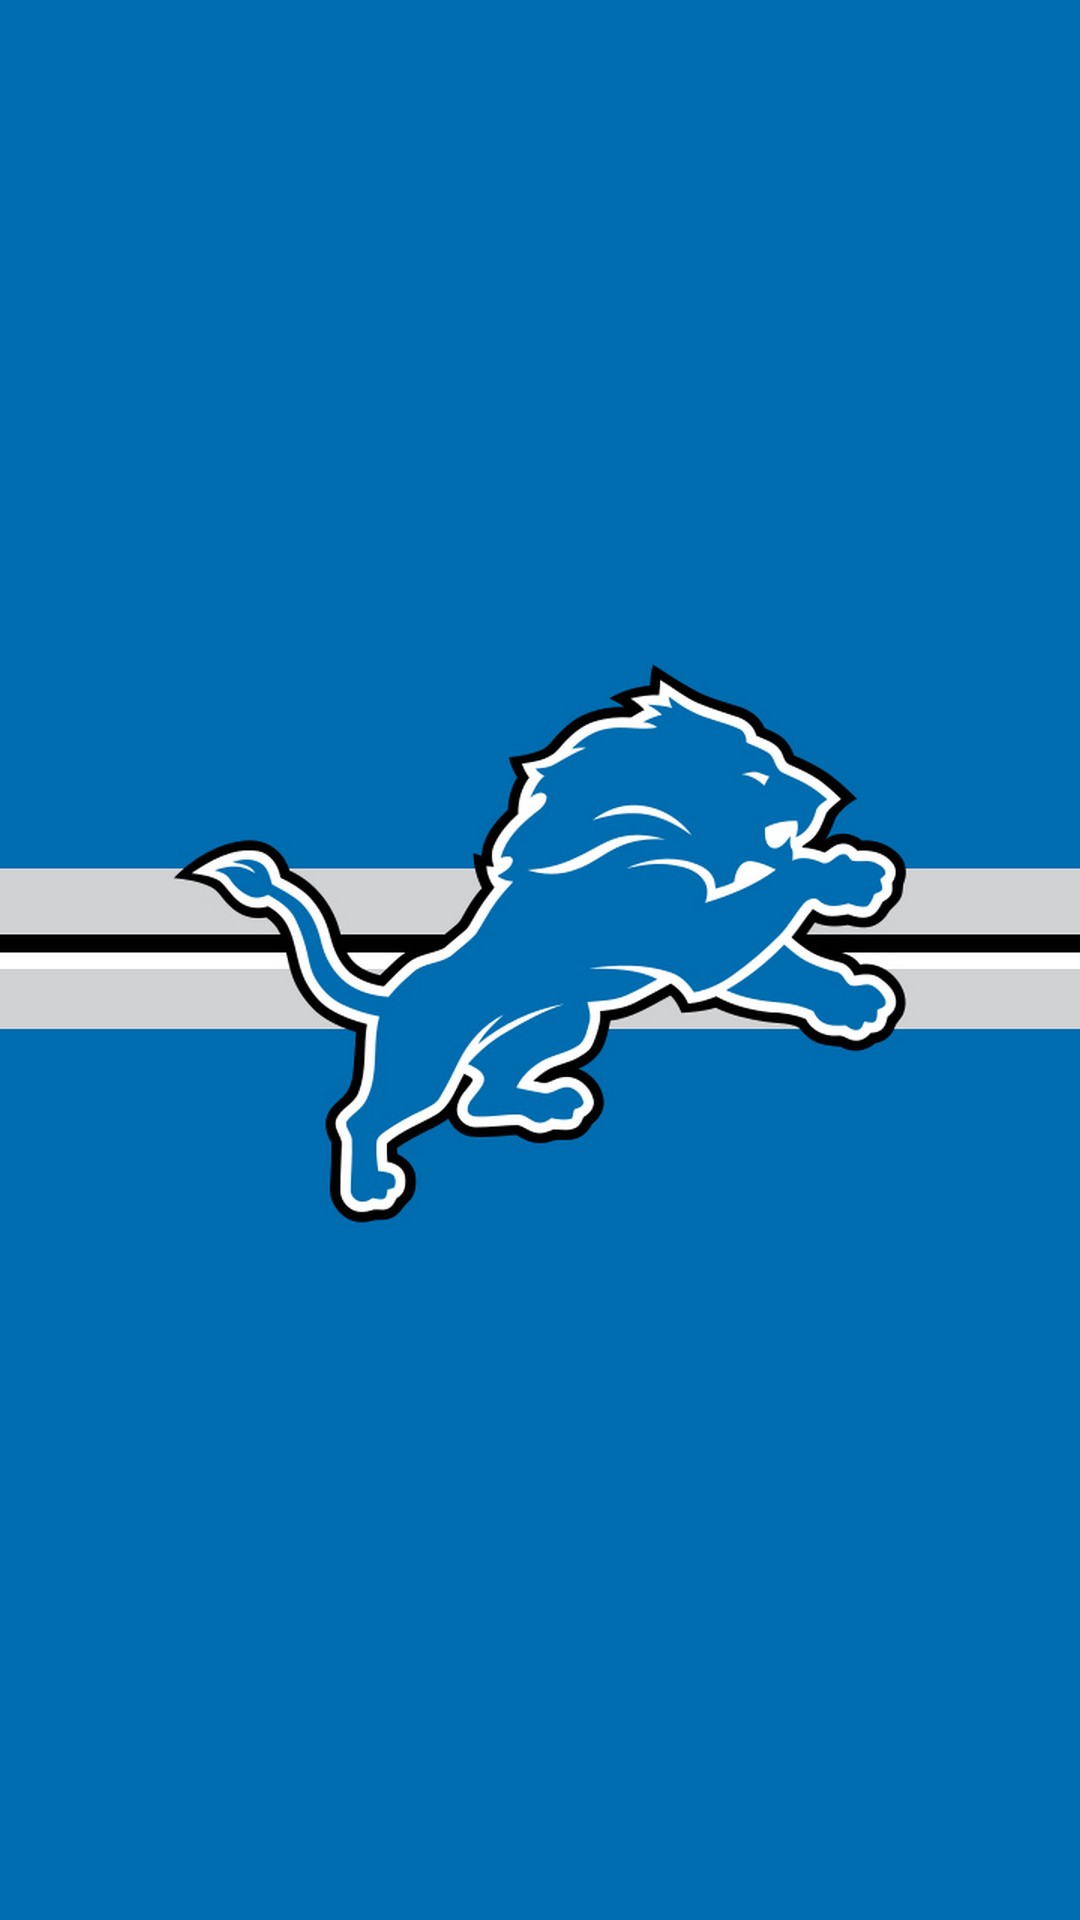 Detroit Lions iPhone Wallpaper in HD with high-resolution 1080x1920 pixel. Download and set as wallpaper for Apple iPhone X, XS Max, XR, 8, 7, 6, SE, iPad, Android